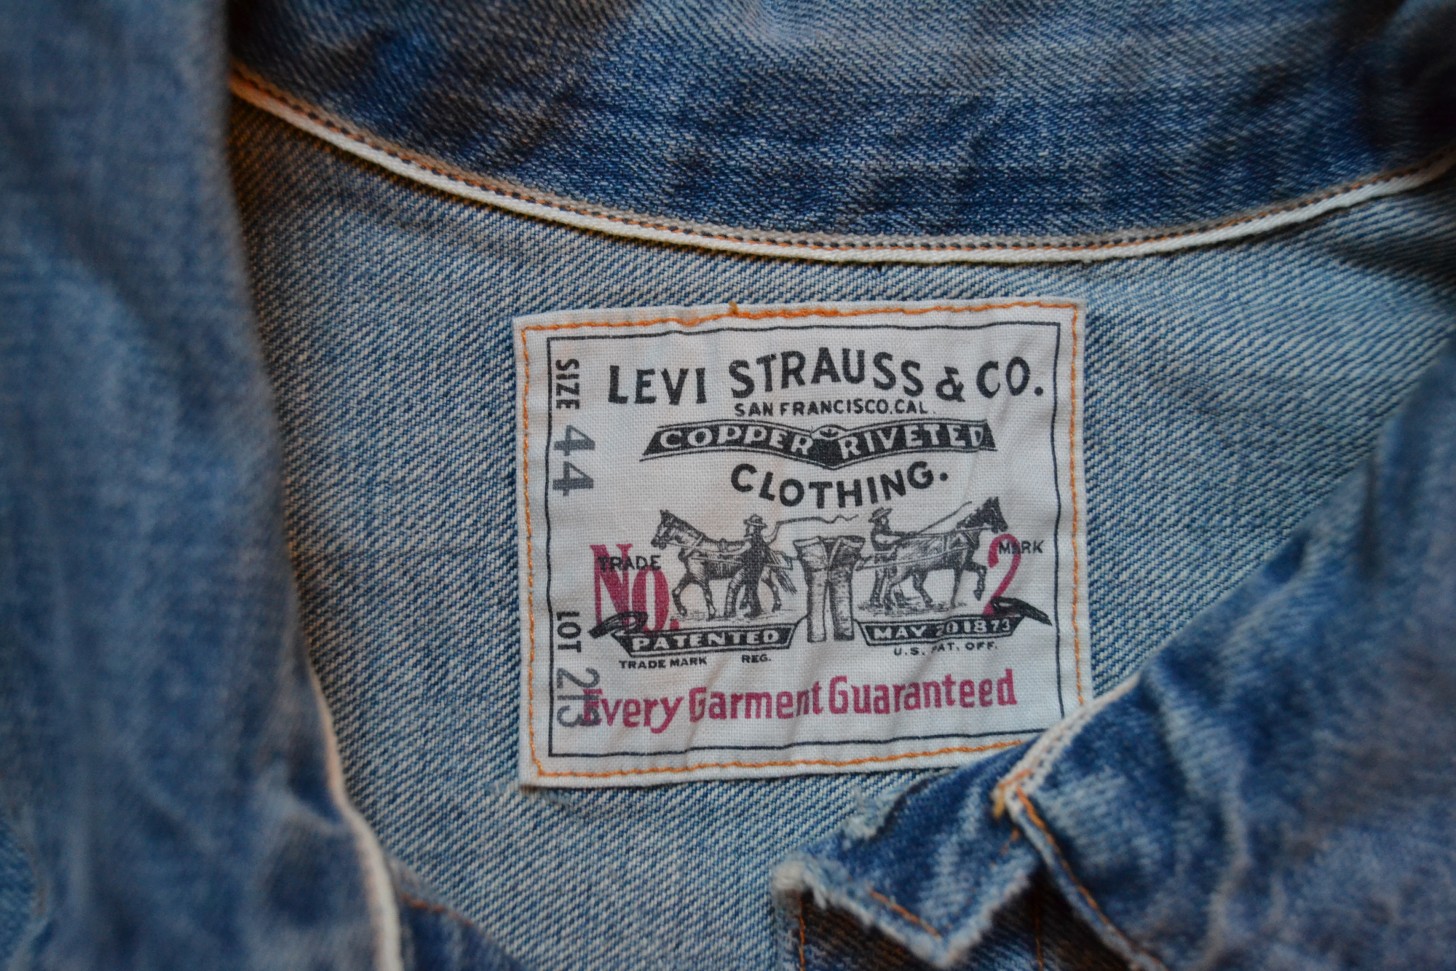 levis tags through the years